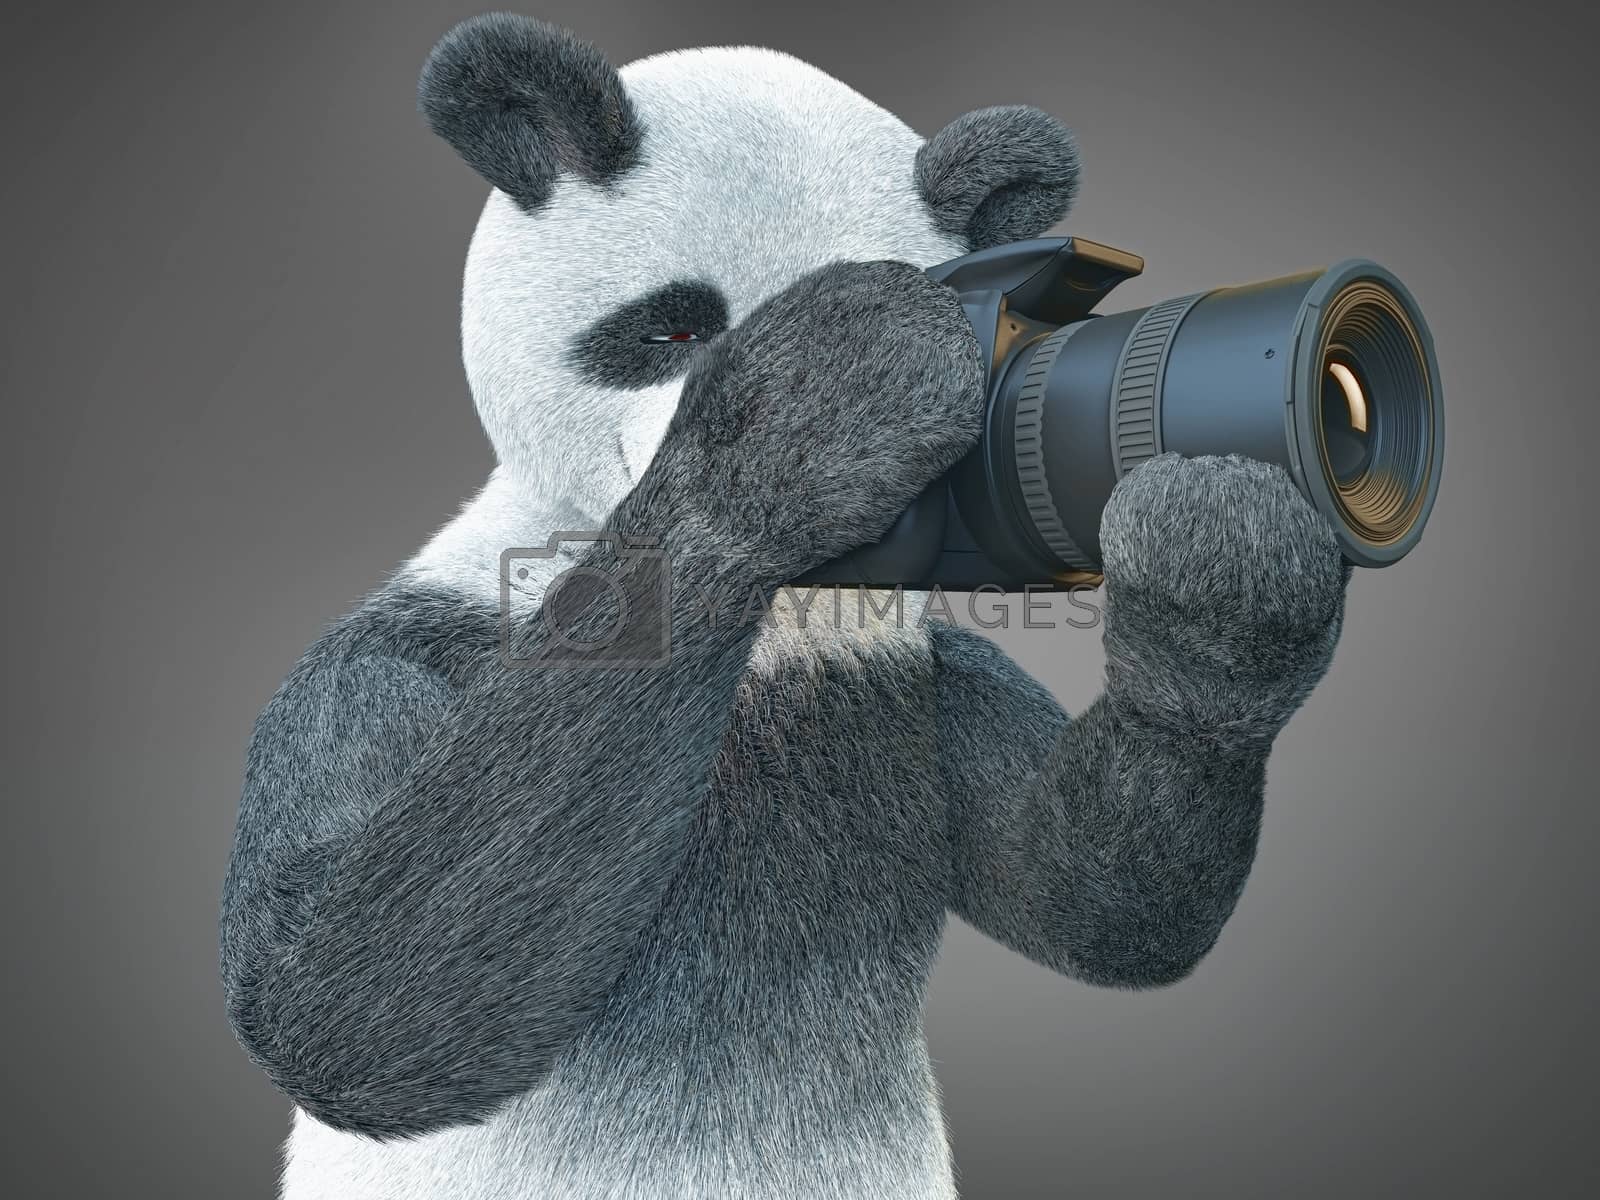 Royalty free image of panda animail character photographer camera takes picture isolated background 3d cg render digital illustration by xtate